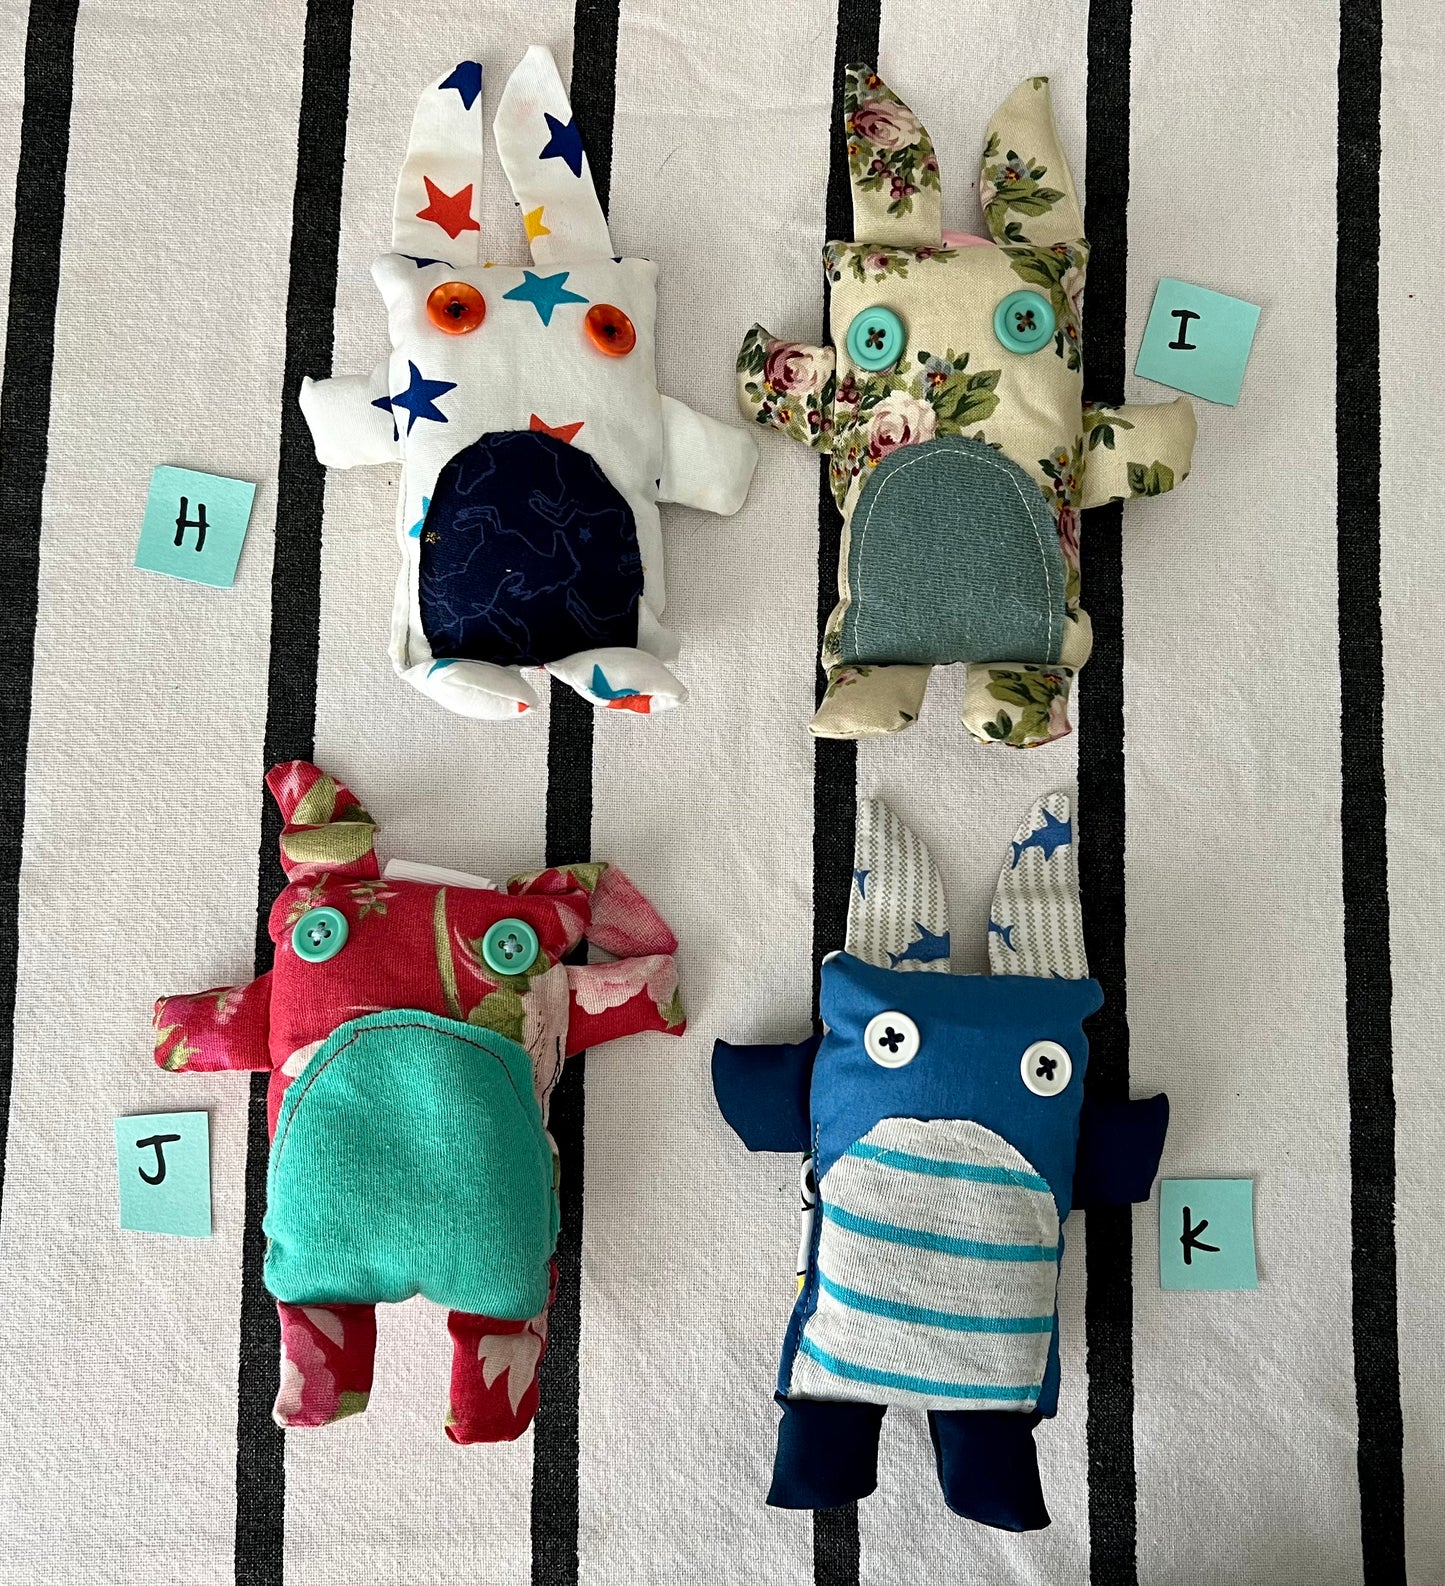 front view of mini animals with letters H I J K next to each one.